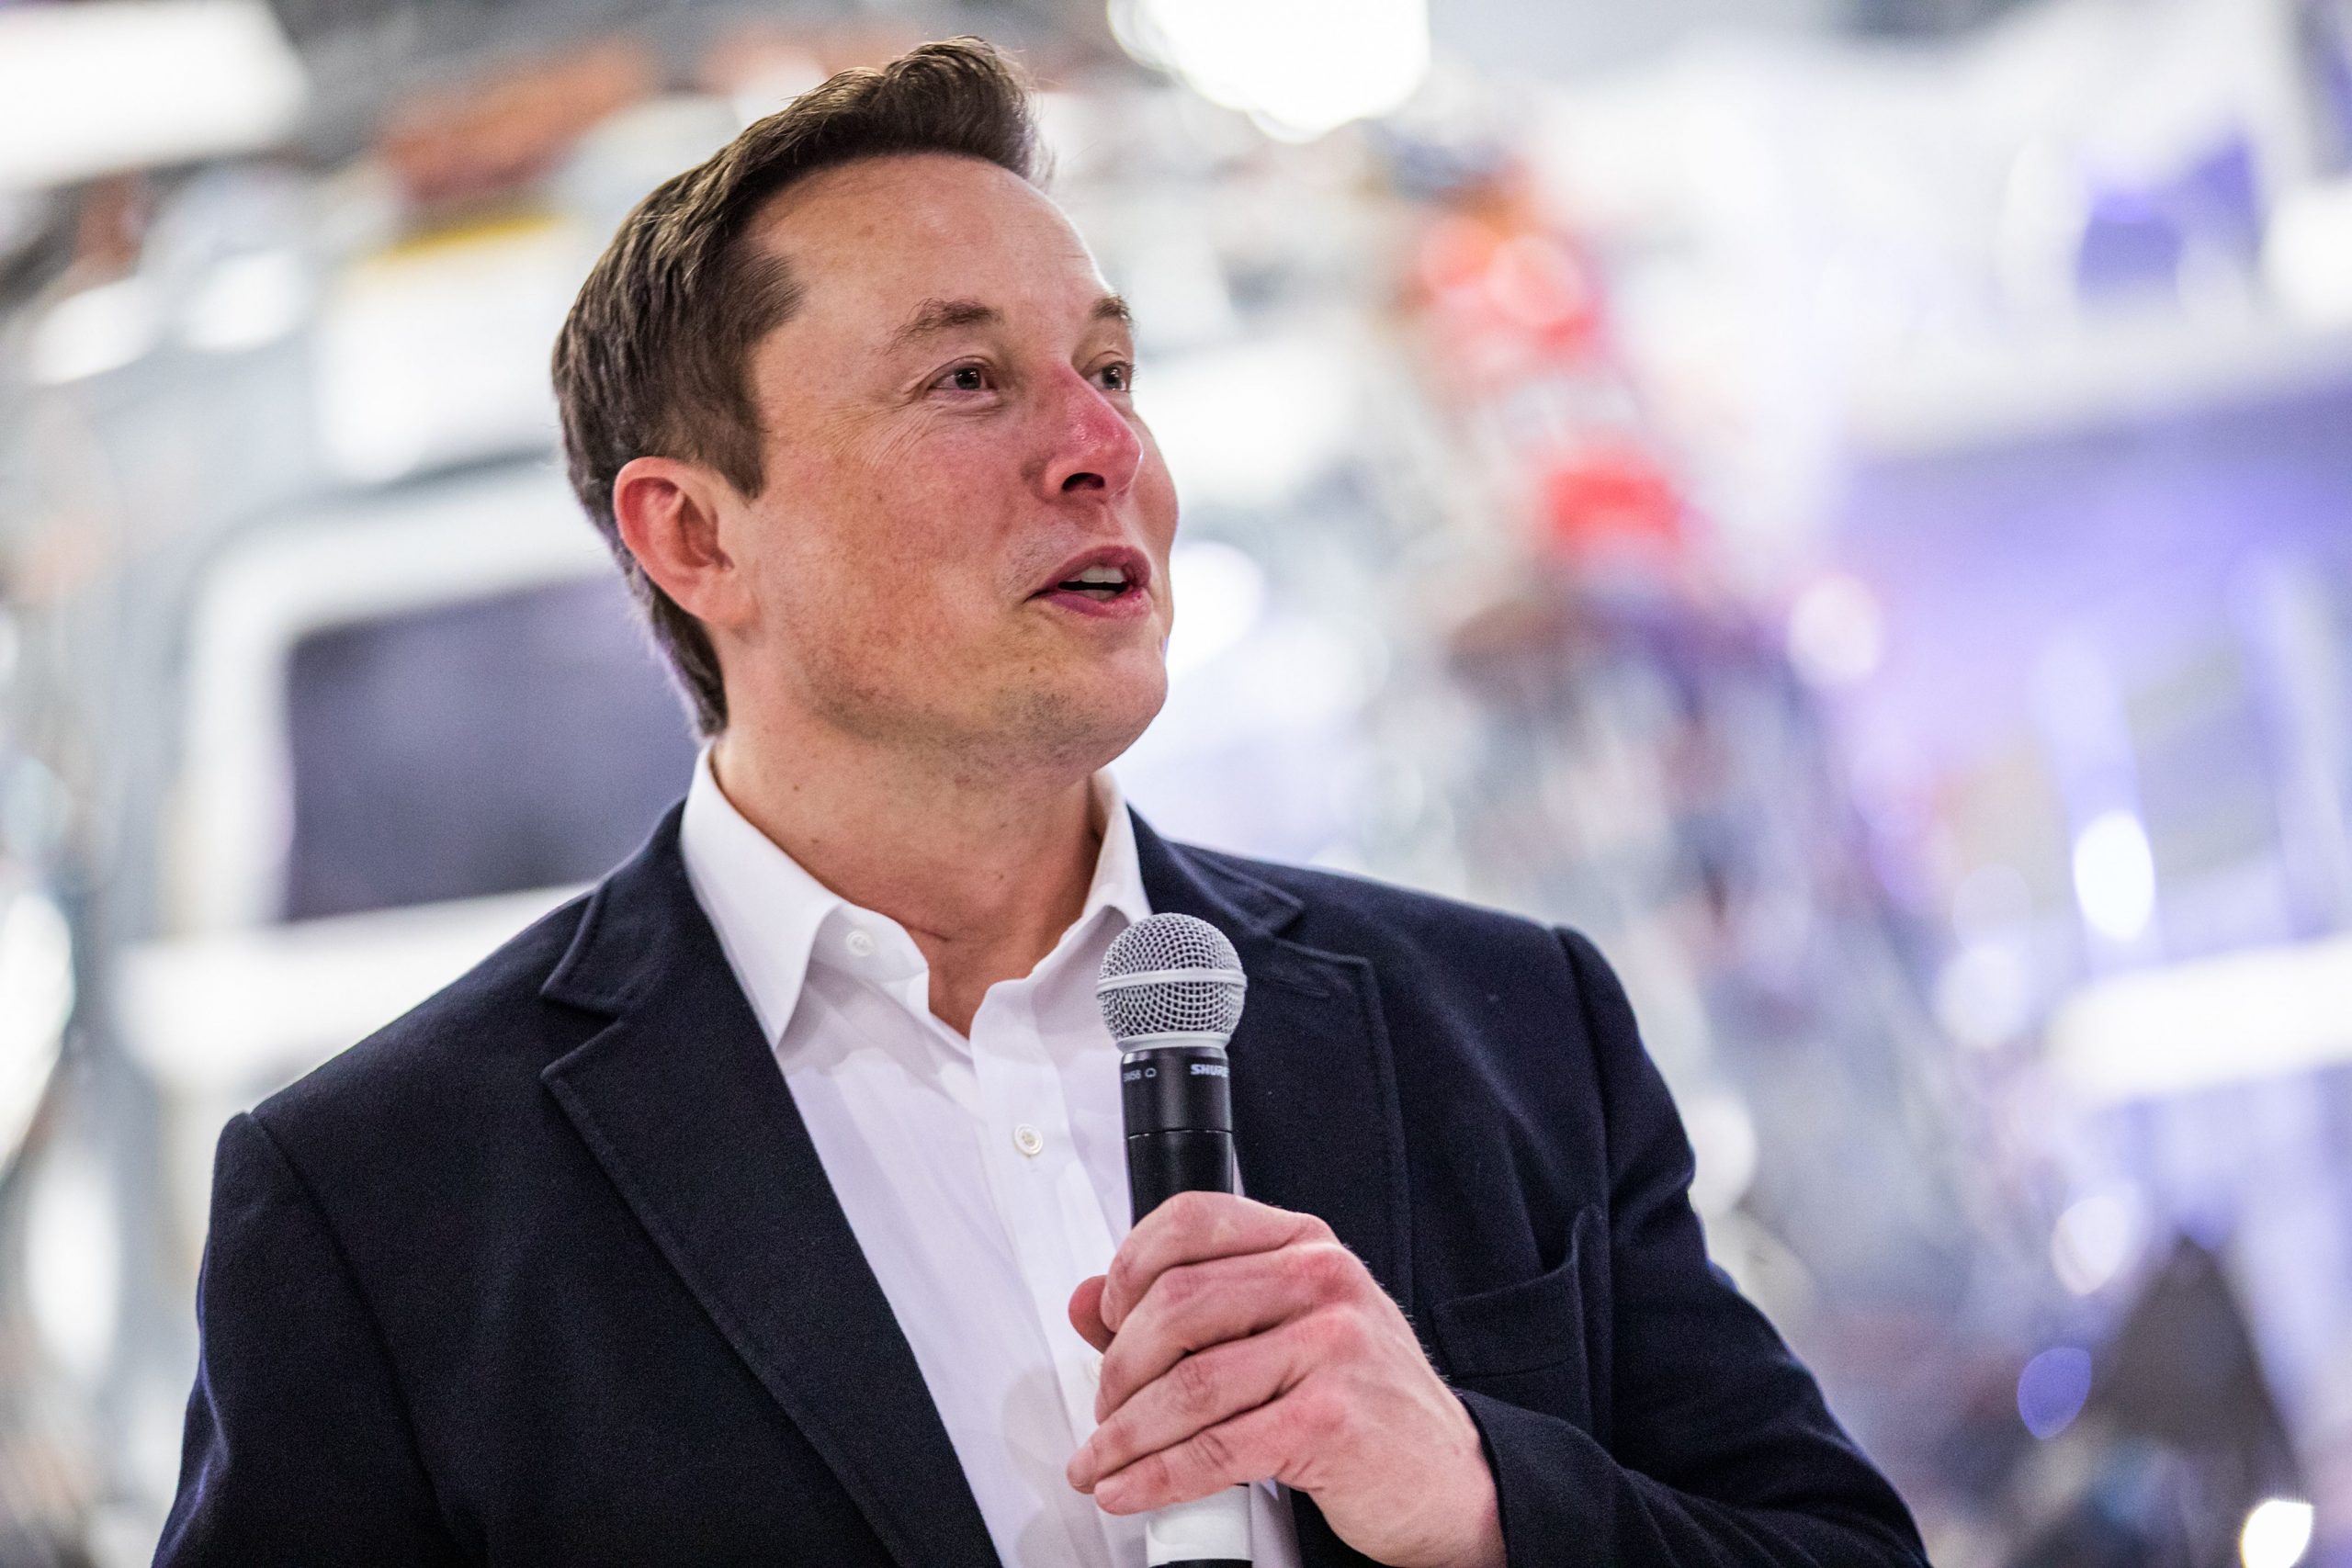 Elon Musk fires Twitter executives, moments after SSP 2.4 trillion take over